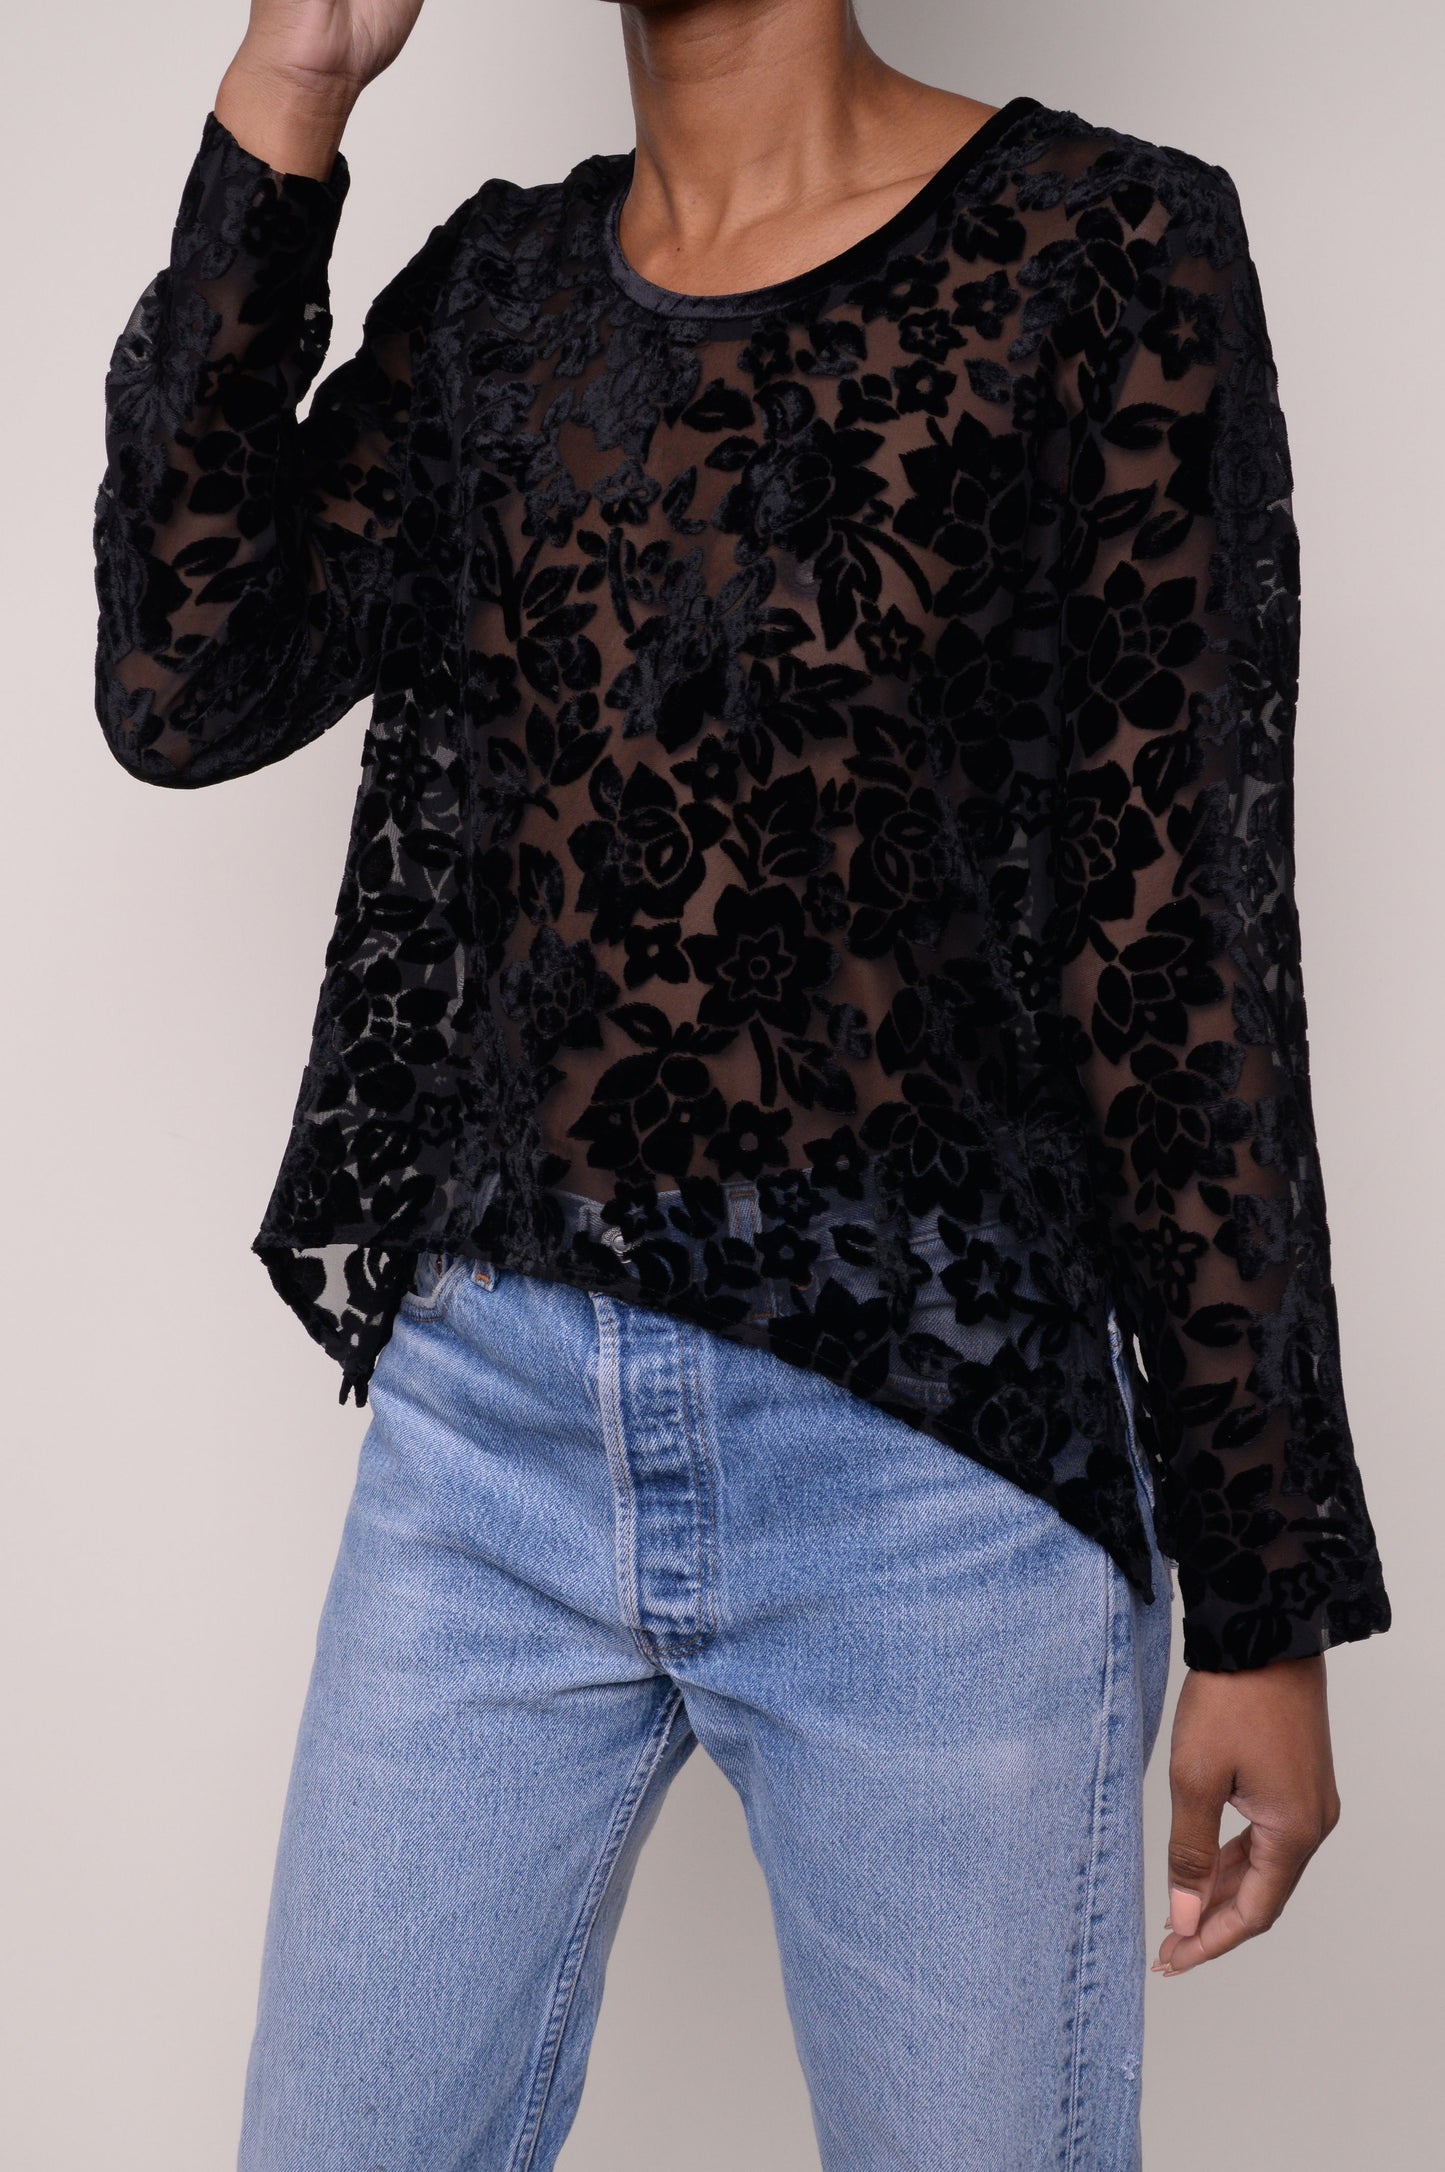 Sheer Lace Floral Blouse